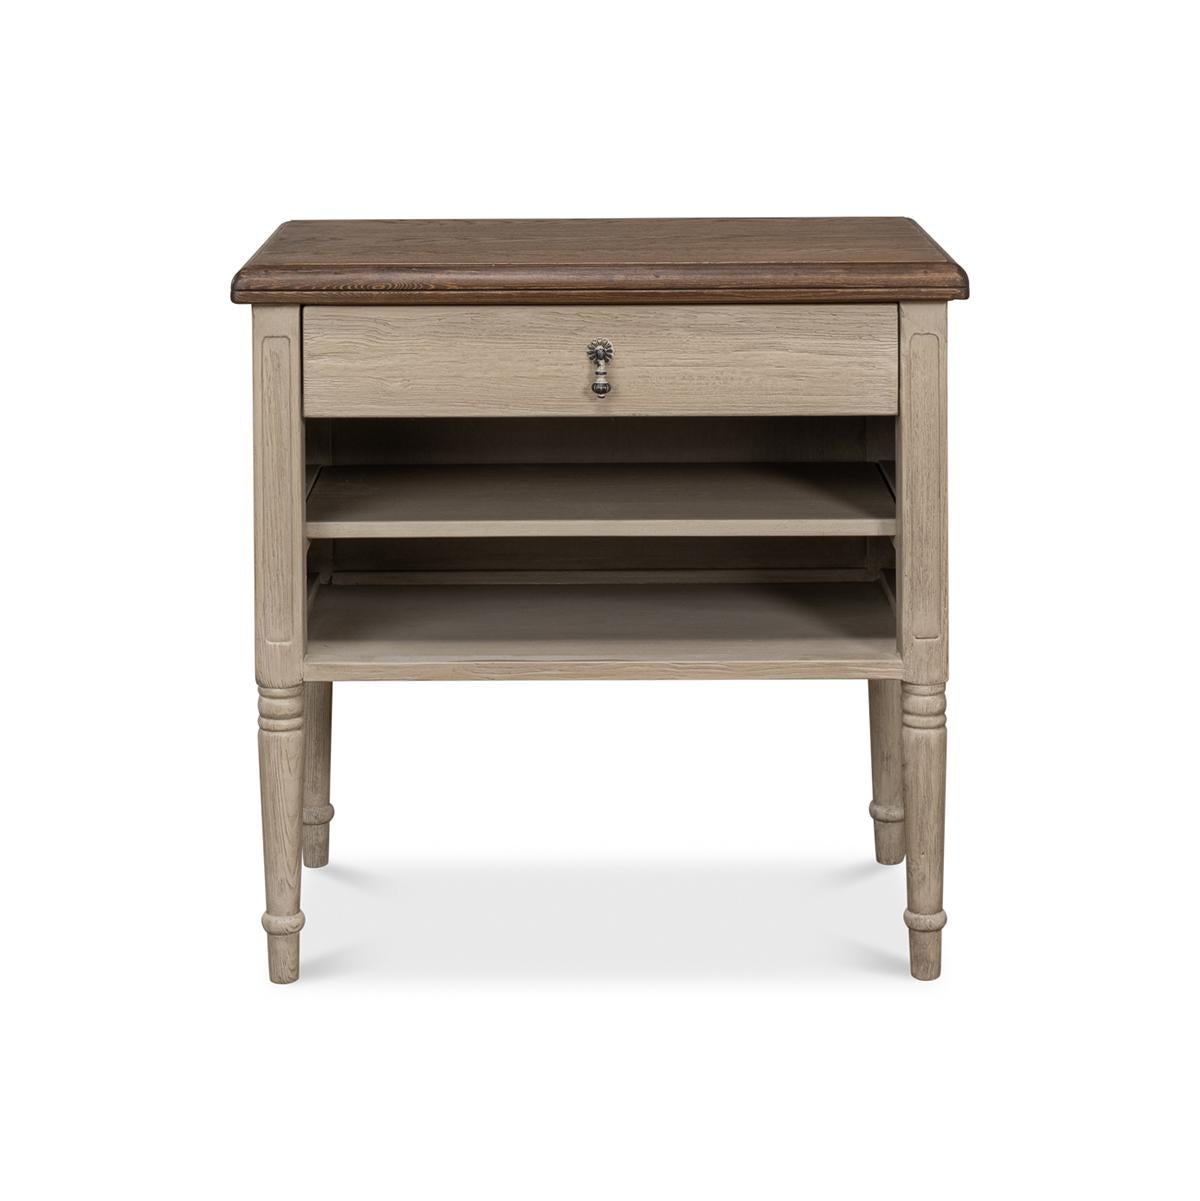 Made with pine and an oak top in a barn grey painted finish and brown transitional top. With a single drawer and open shelves raised on turned and tapered legs.

Dimensions: 30